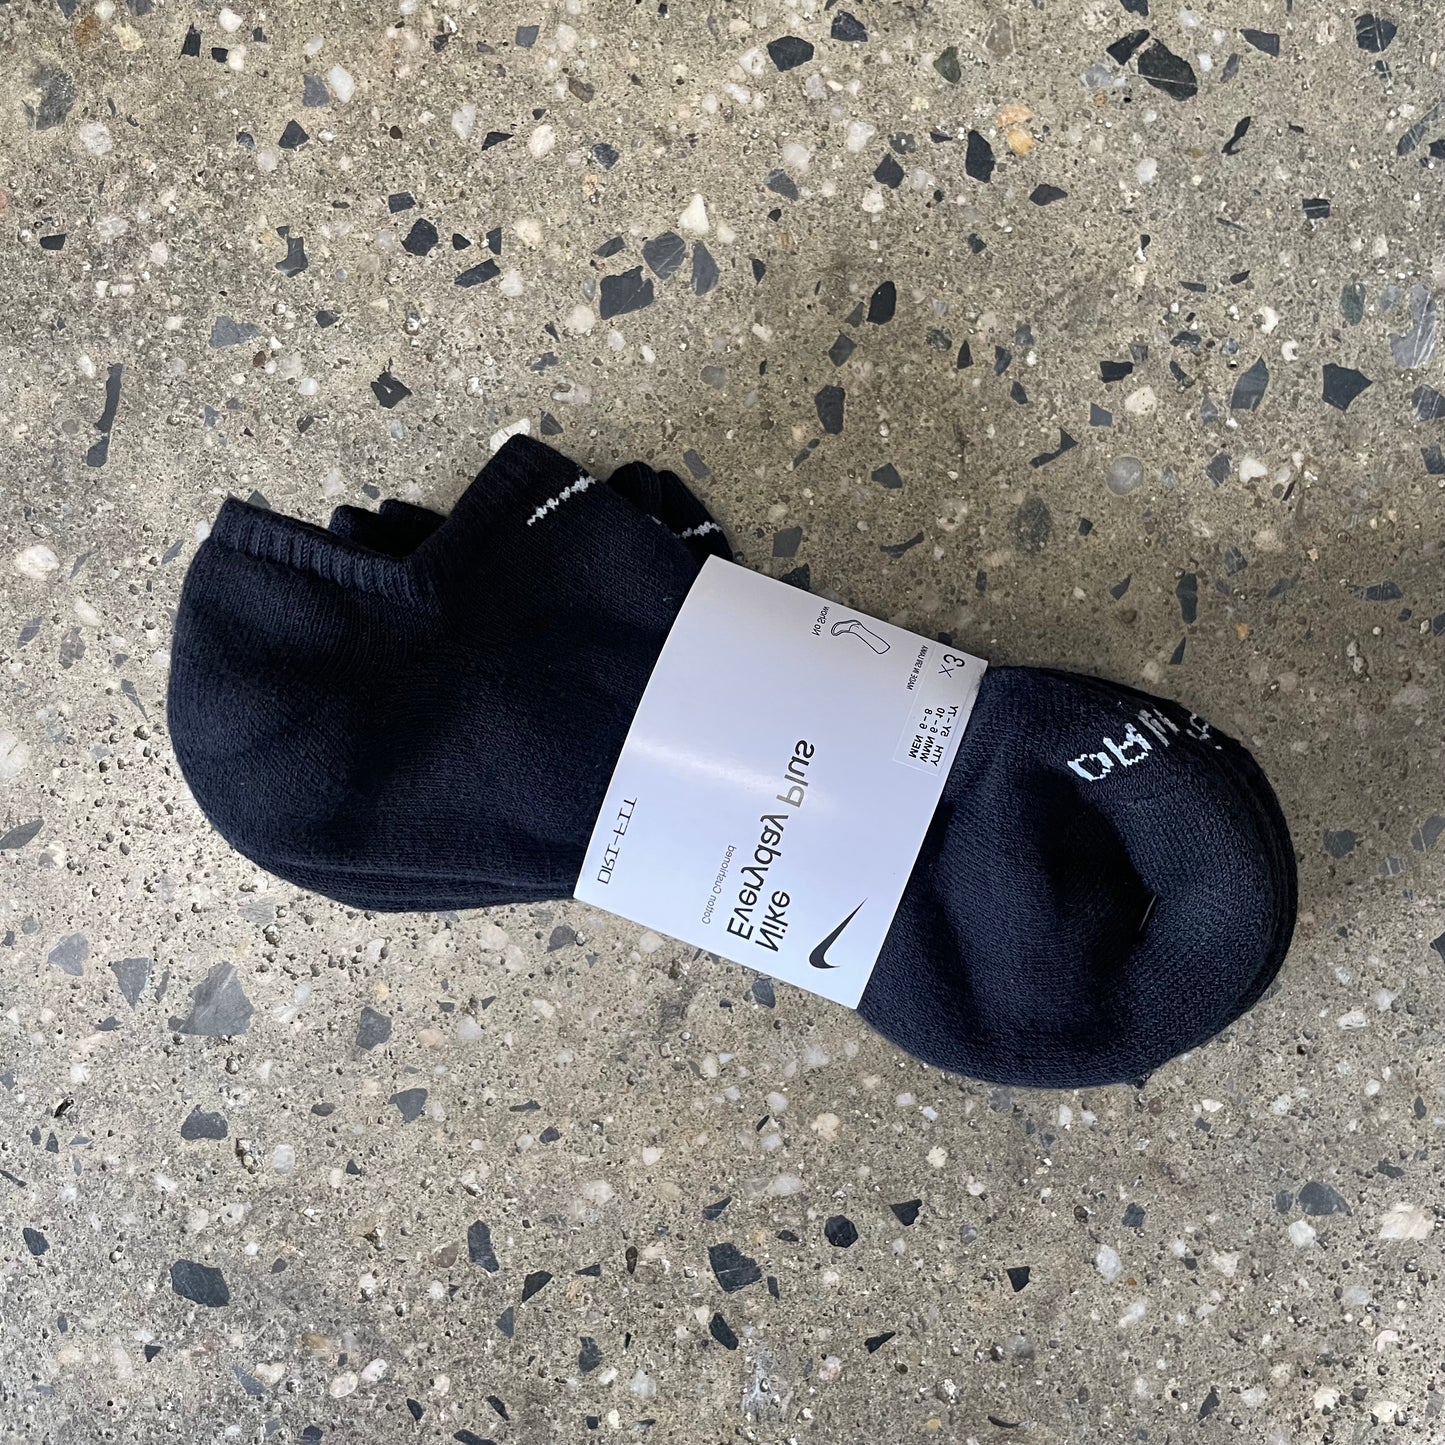 Ankle sock 3-pack